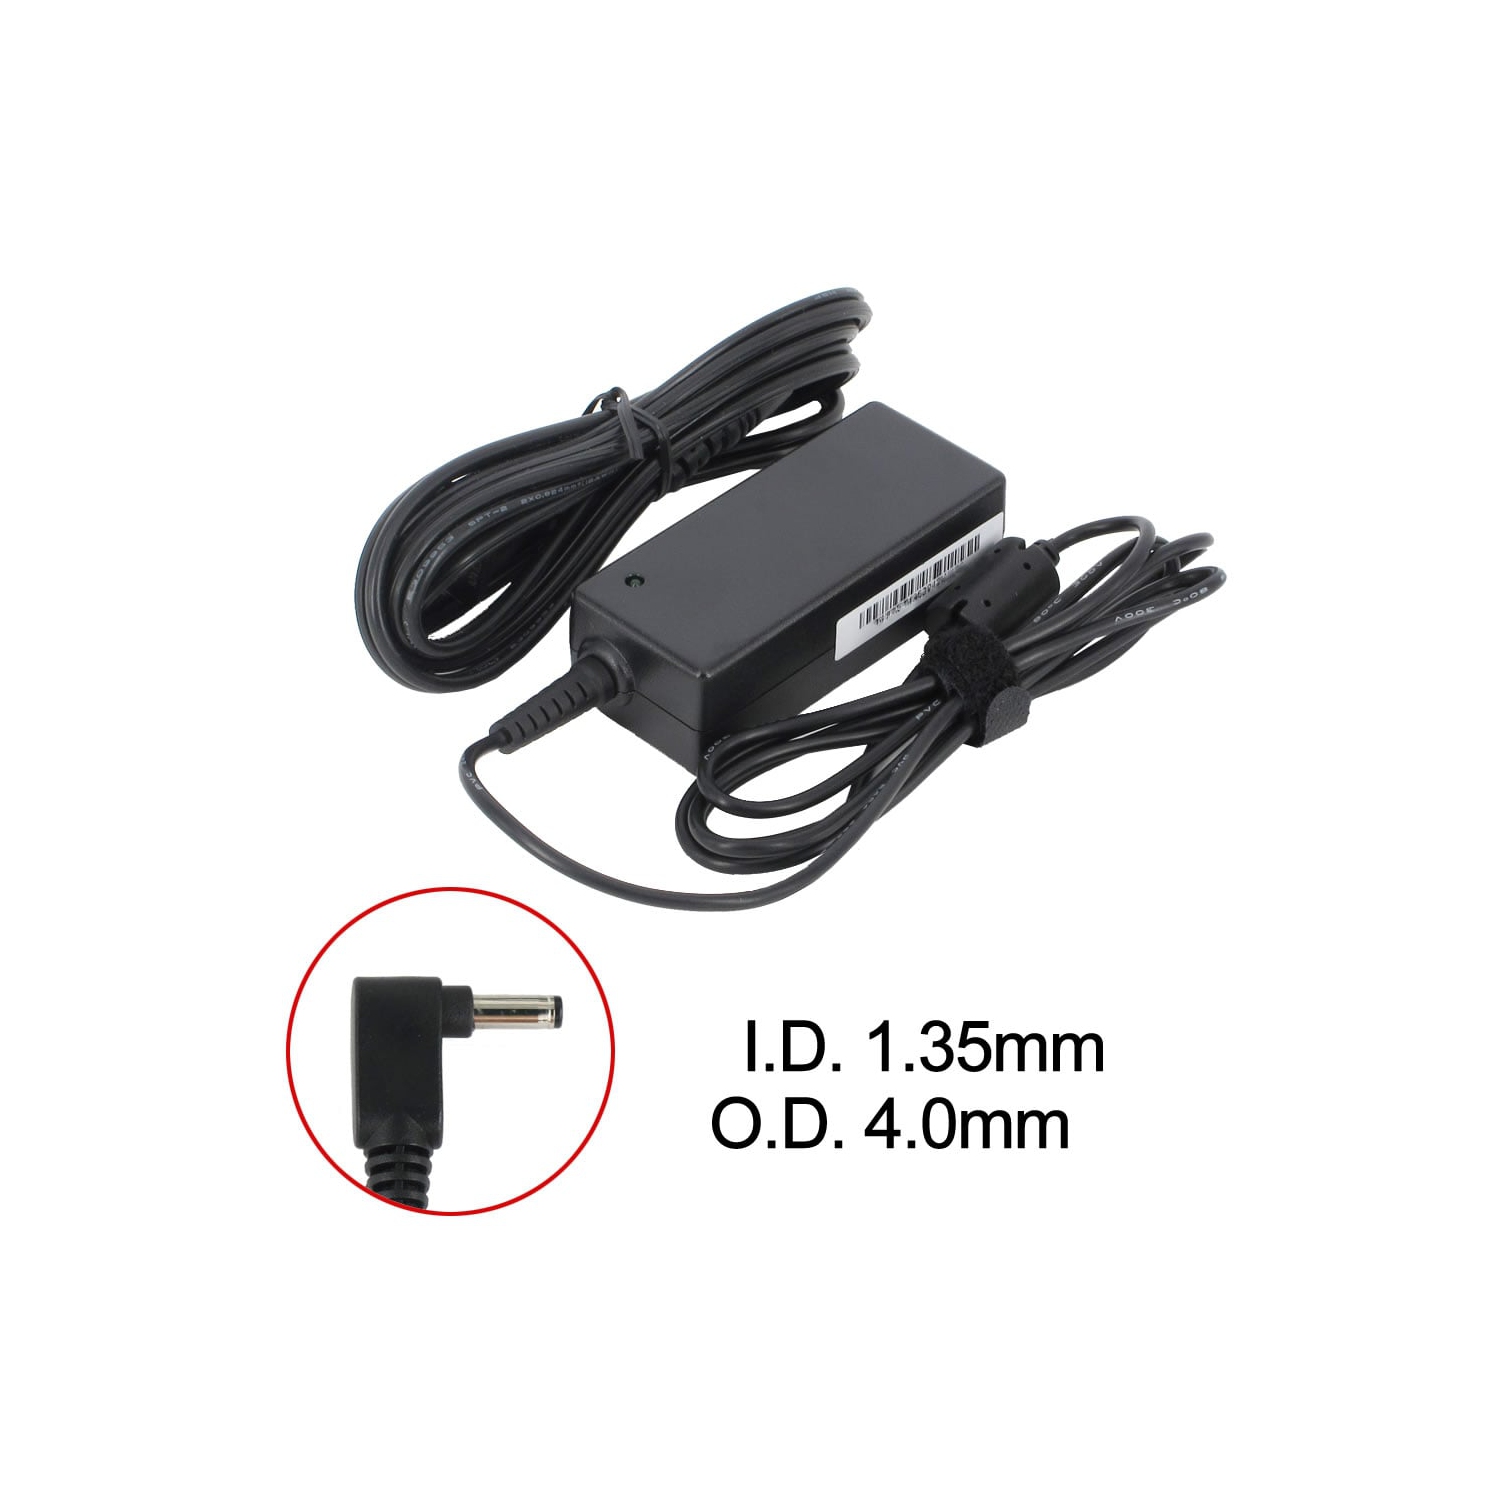 BATTDEPOT New Laptop AC Adapter for Asus X540YA-3F 0A001-00230400 0A001-00330100 EXA1206EH